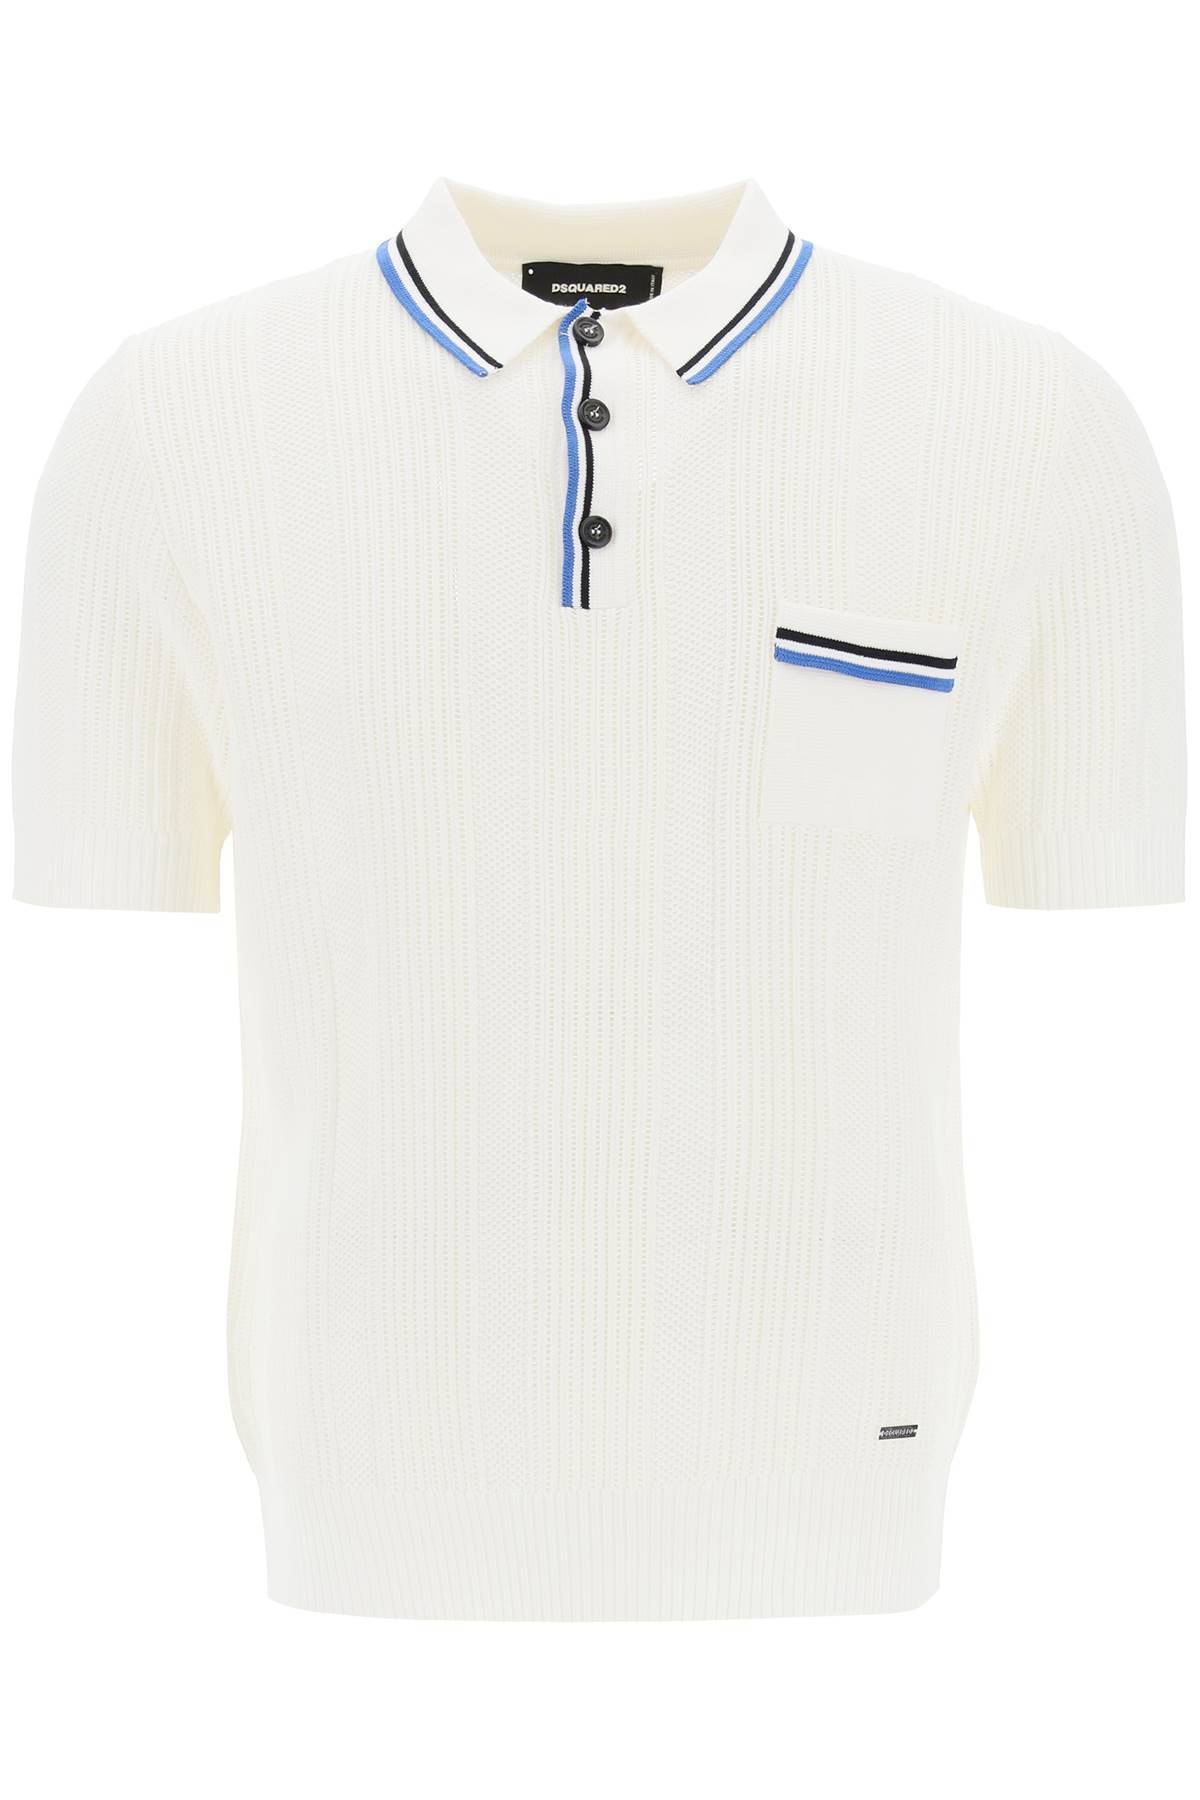 Dsquared2 DSQUARED2 perforated knit polo shirt